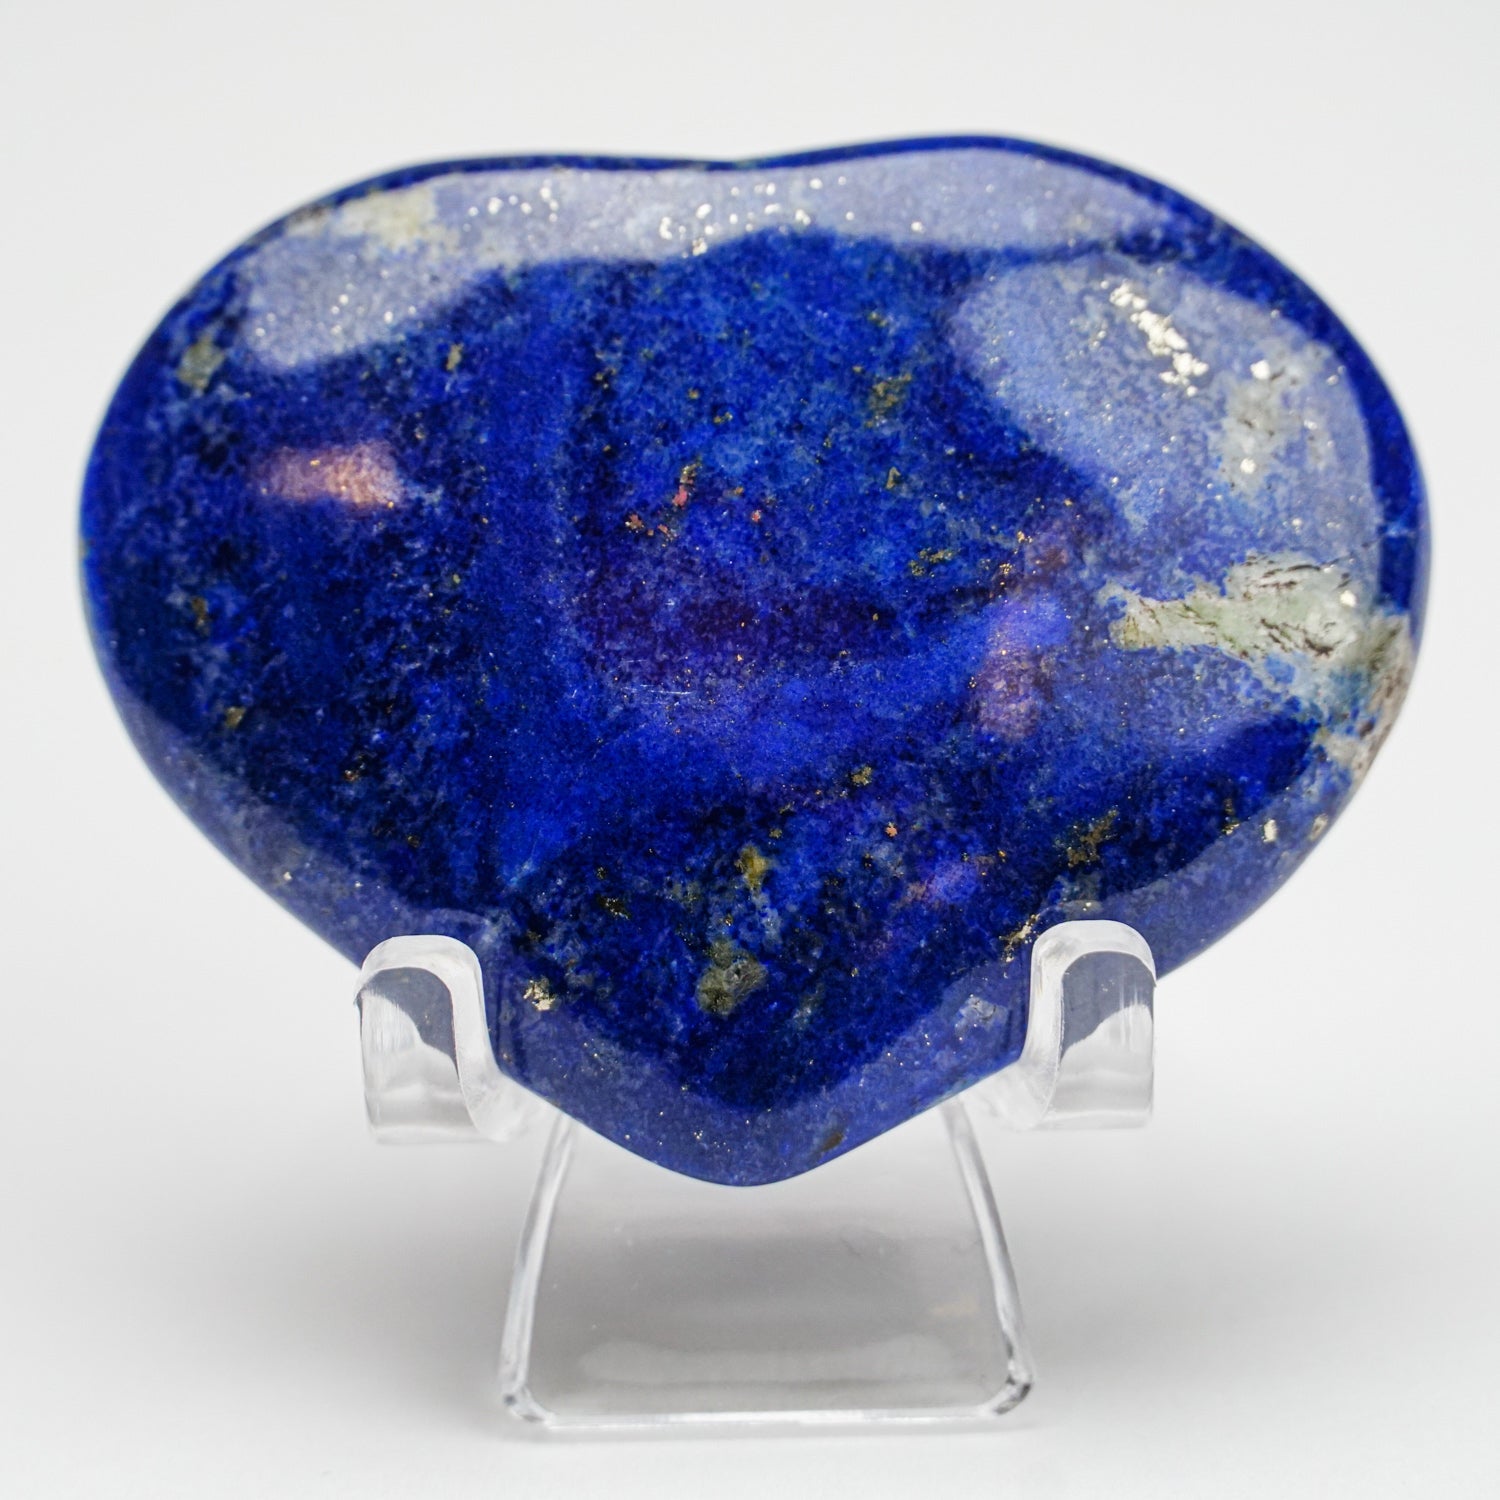 Polished Lapis Lazuli Heart from Afghanistan (38.6 grams)